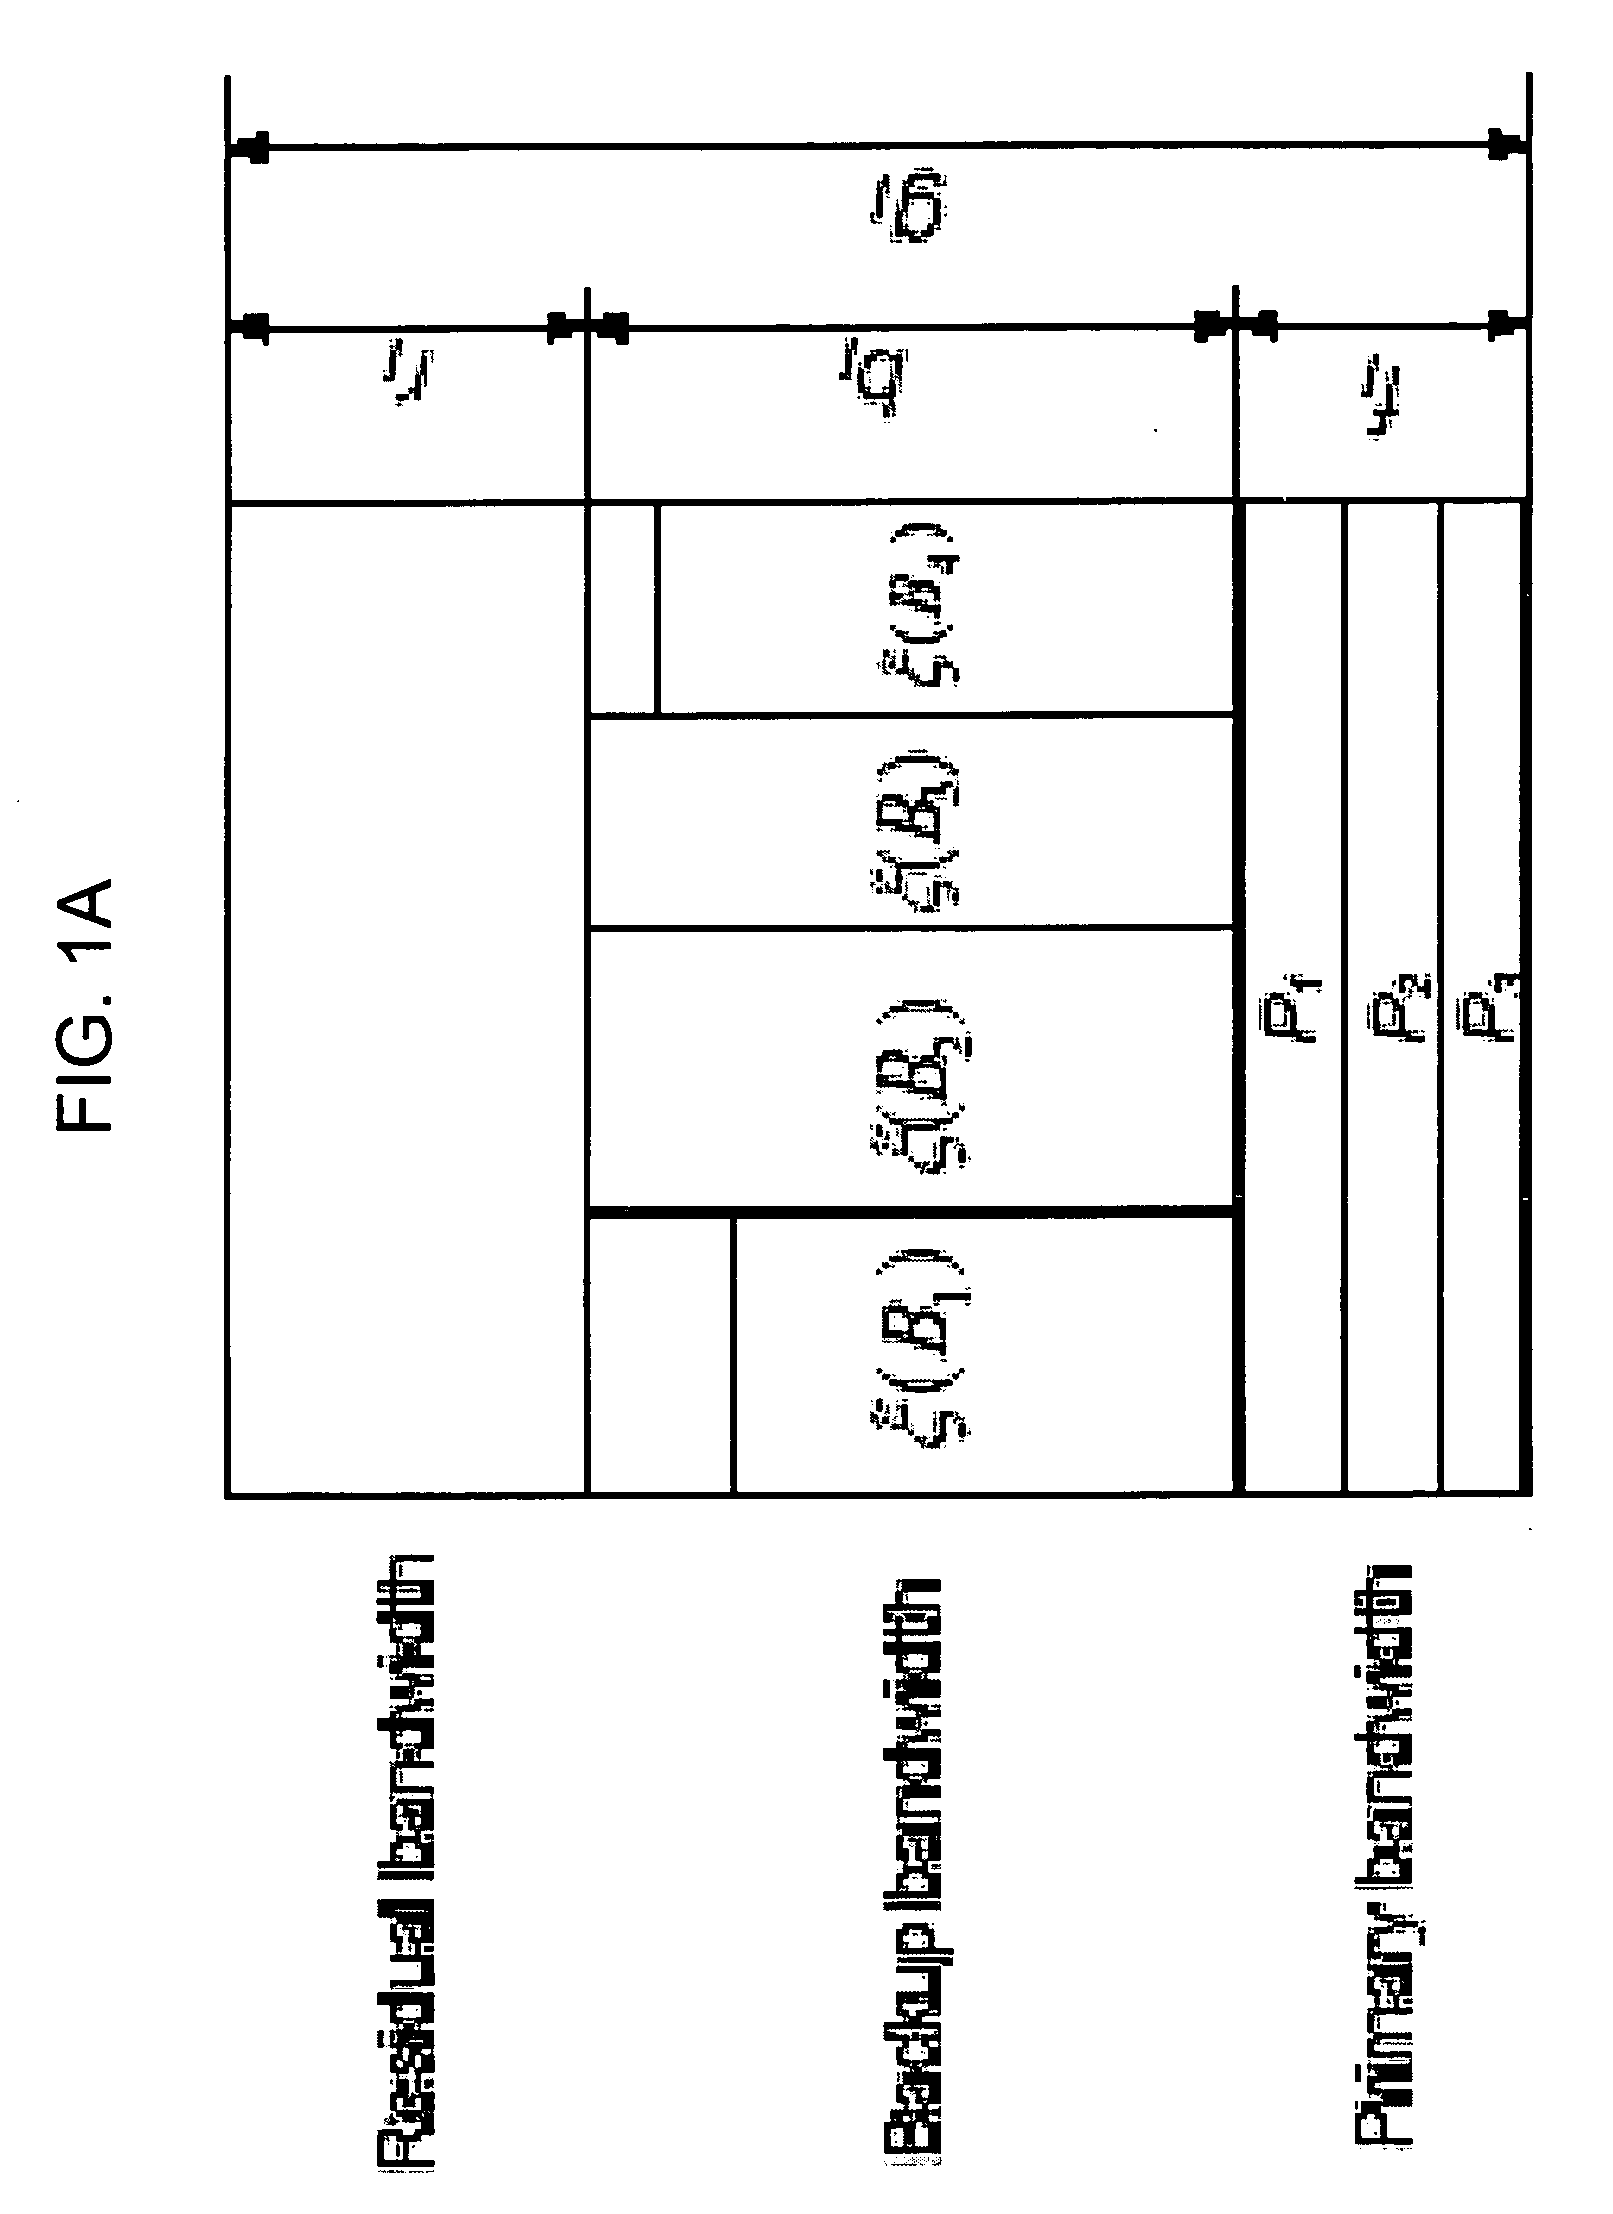 Method and system for shared backup allocation in networks based on partial information